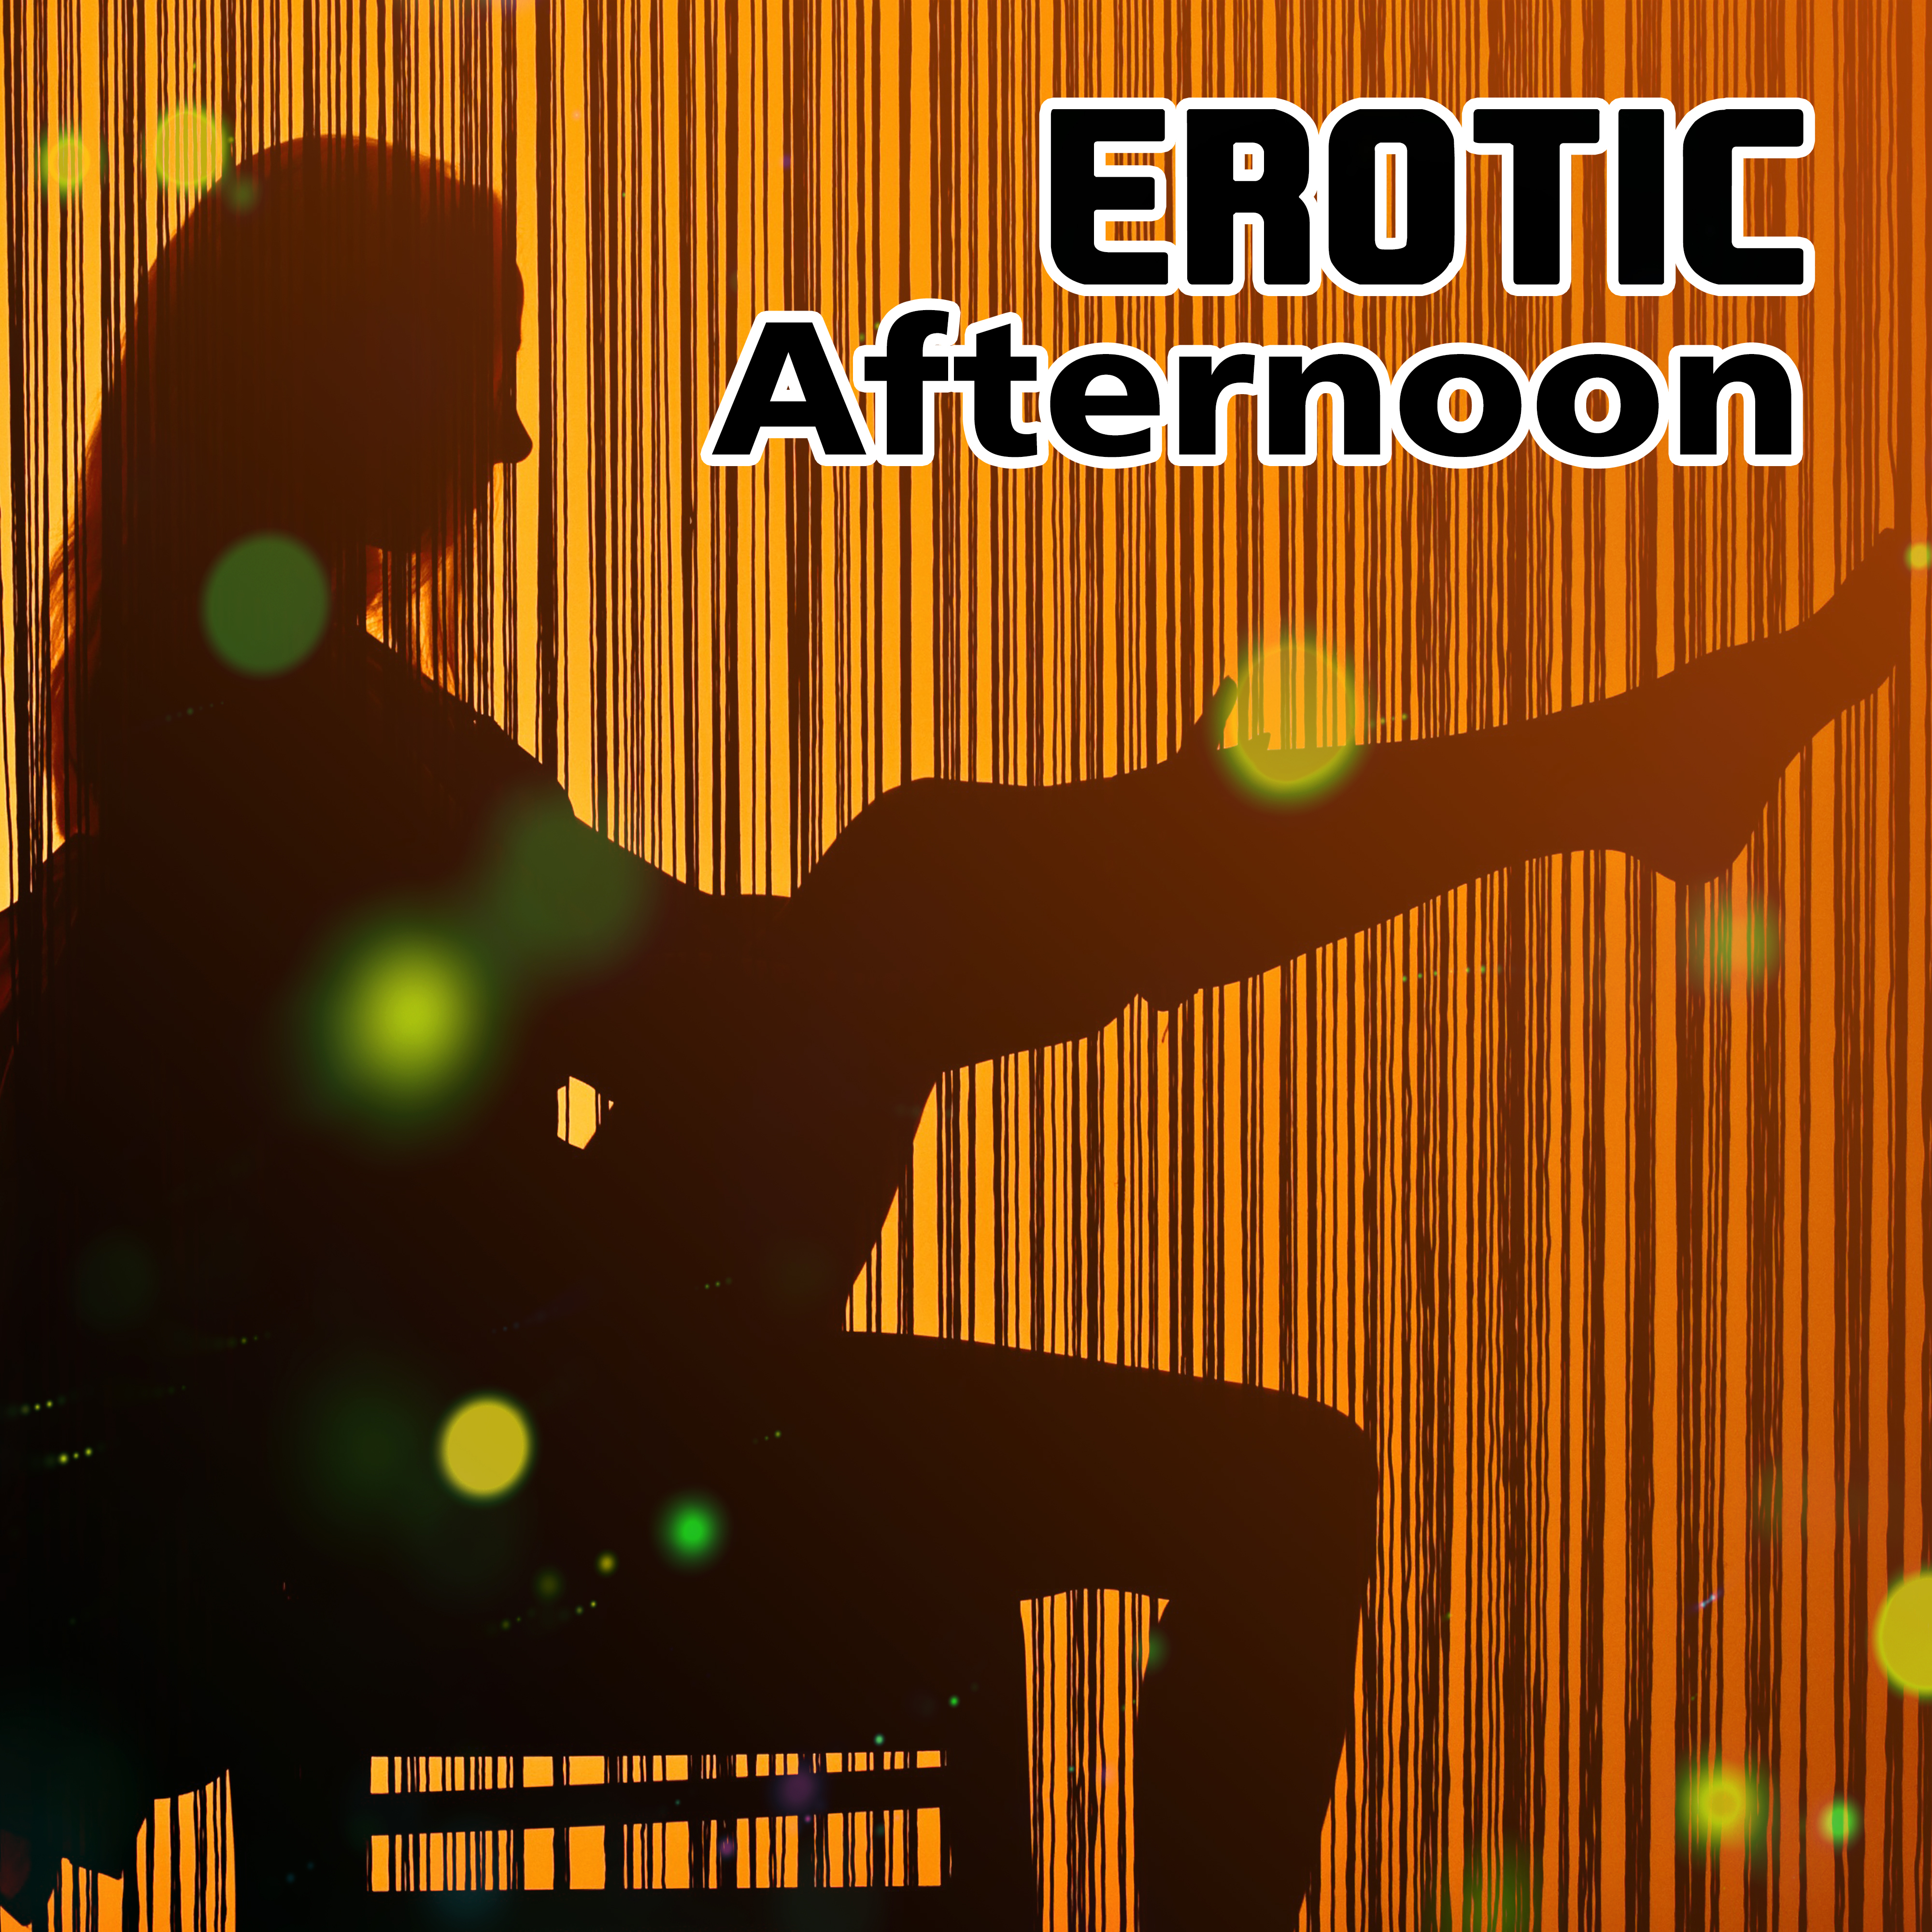 Erotic Afternoon – **** Chill Out, Sensuality, Fancy Games, Making Love, Erotic Lounge, Deep Relax, Kamasutra Chill Out